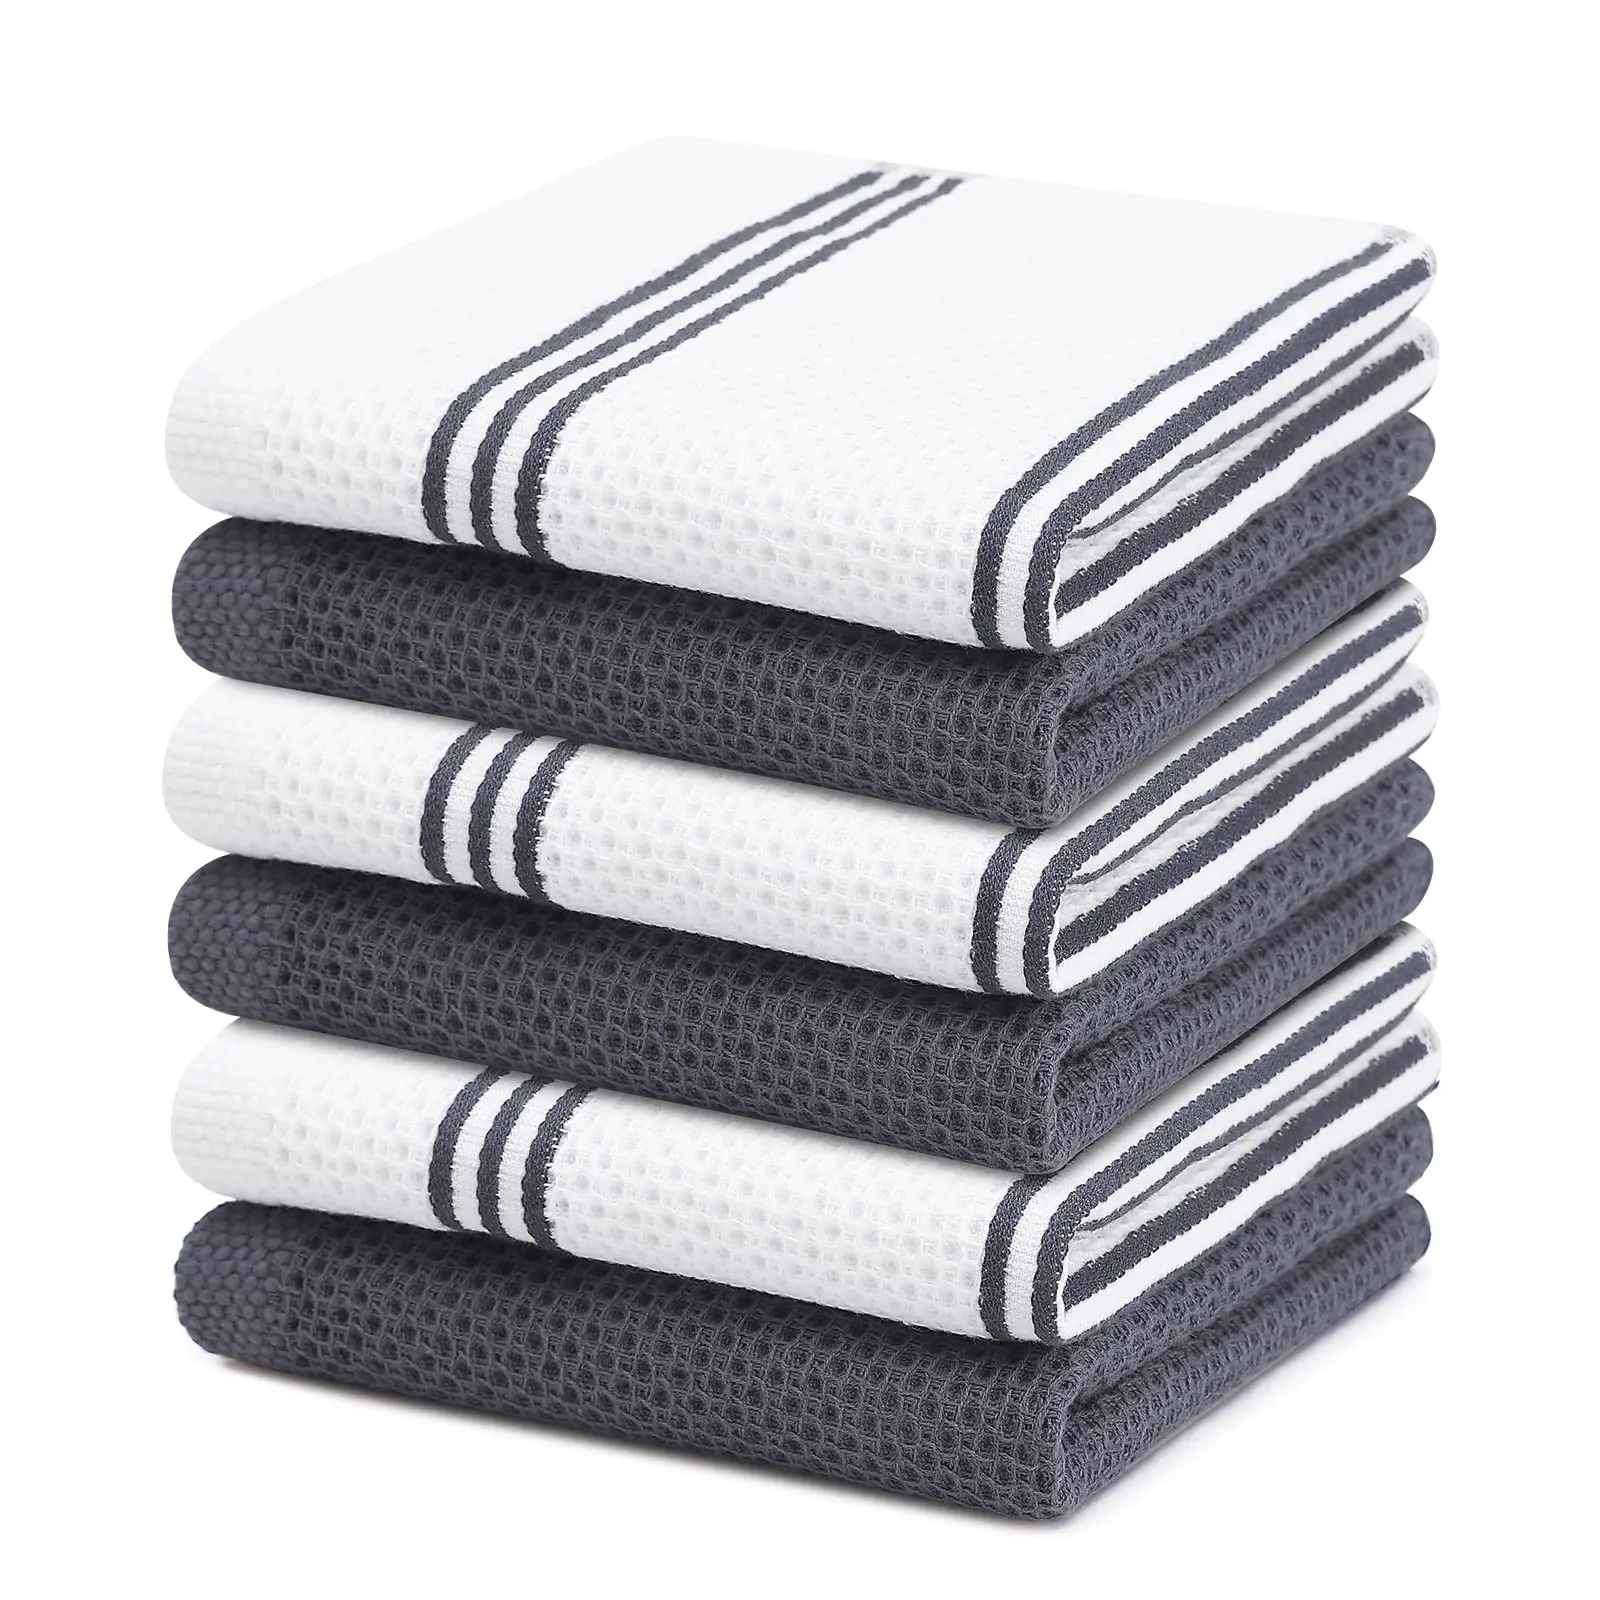 

Homaxy 4/6pcs Cotton Towel For Kitchen Waffle Weave Stripe Kitchen Towel Absorbent Dishcloth Soft Drying Home Cleaning Cloths